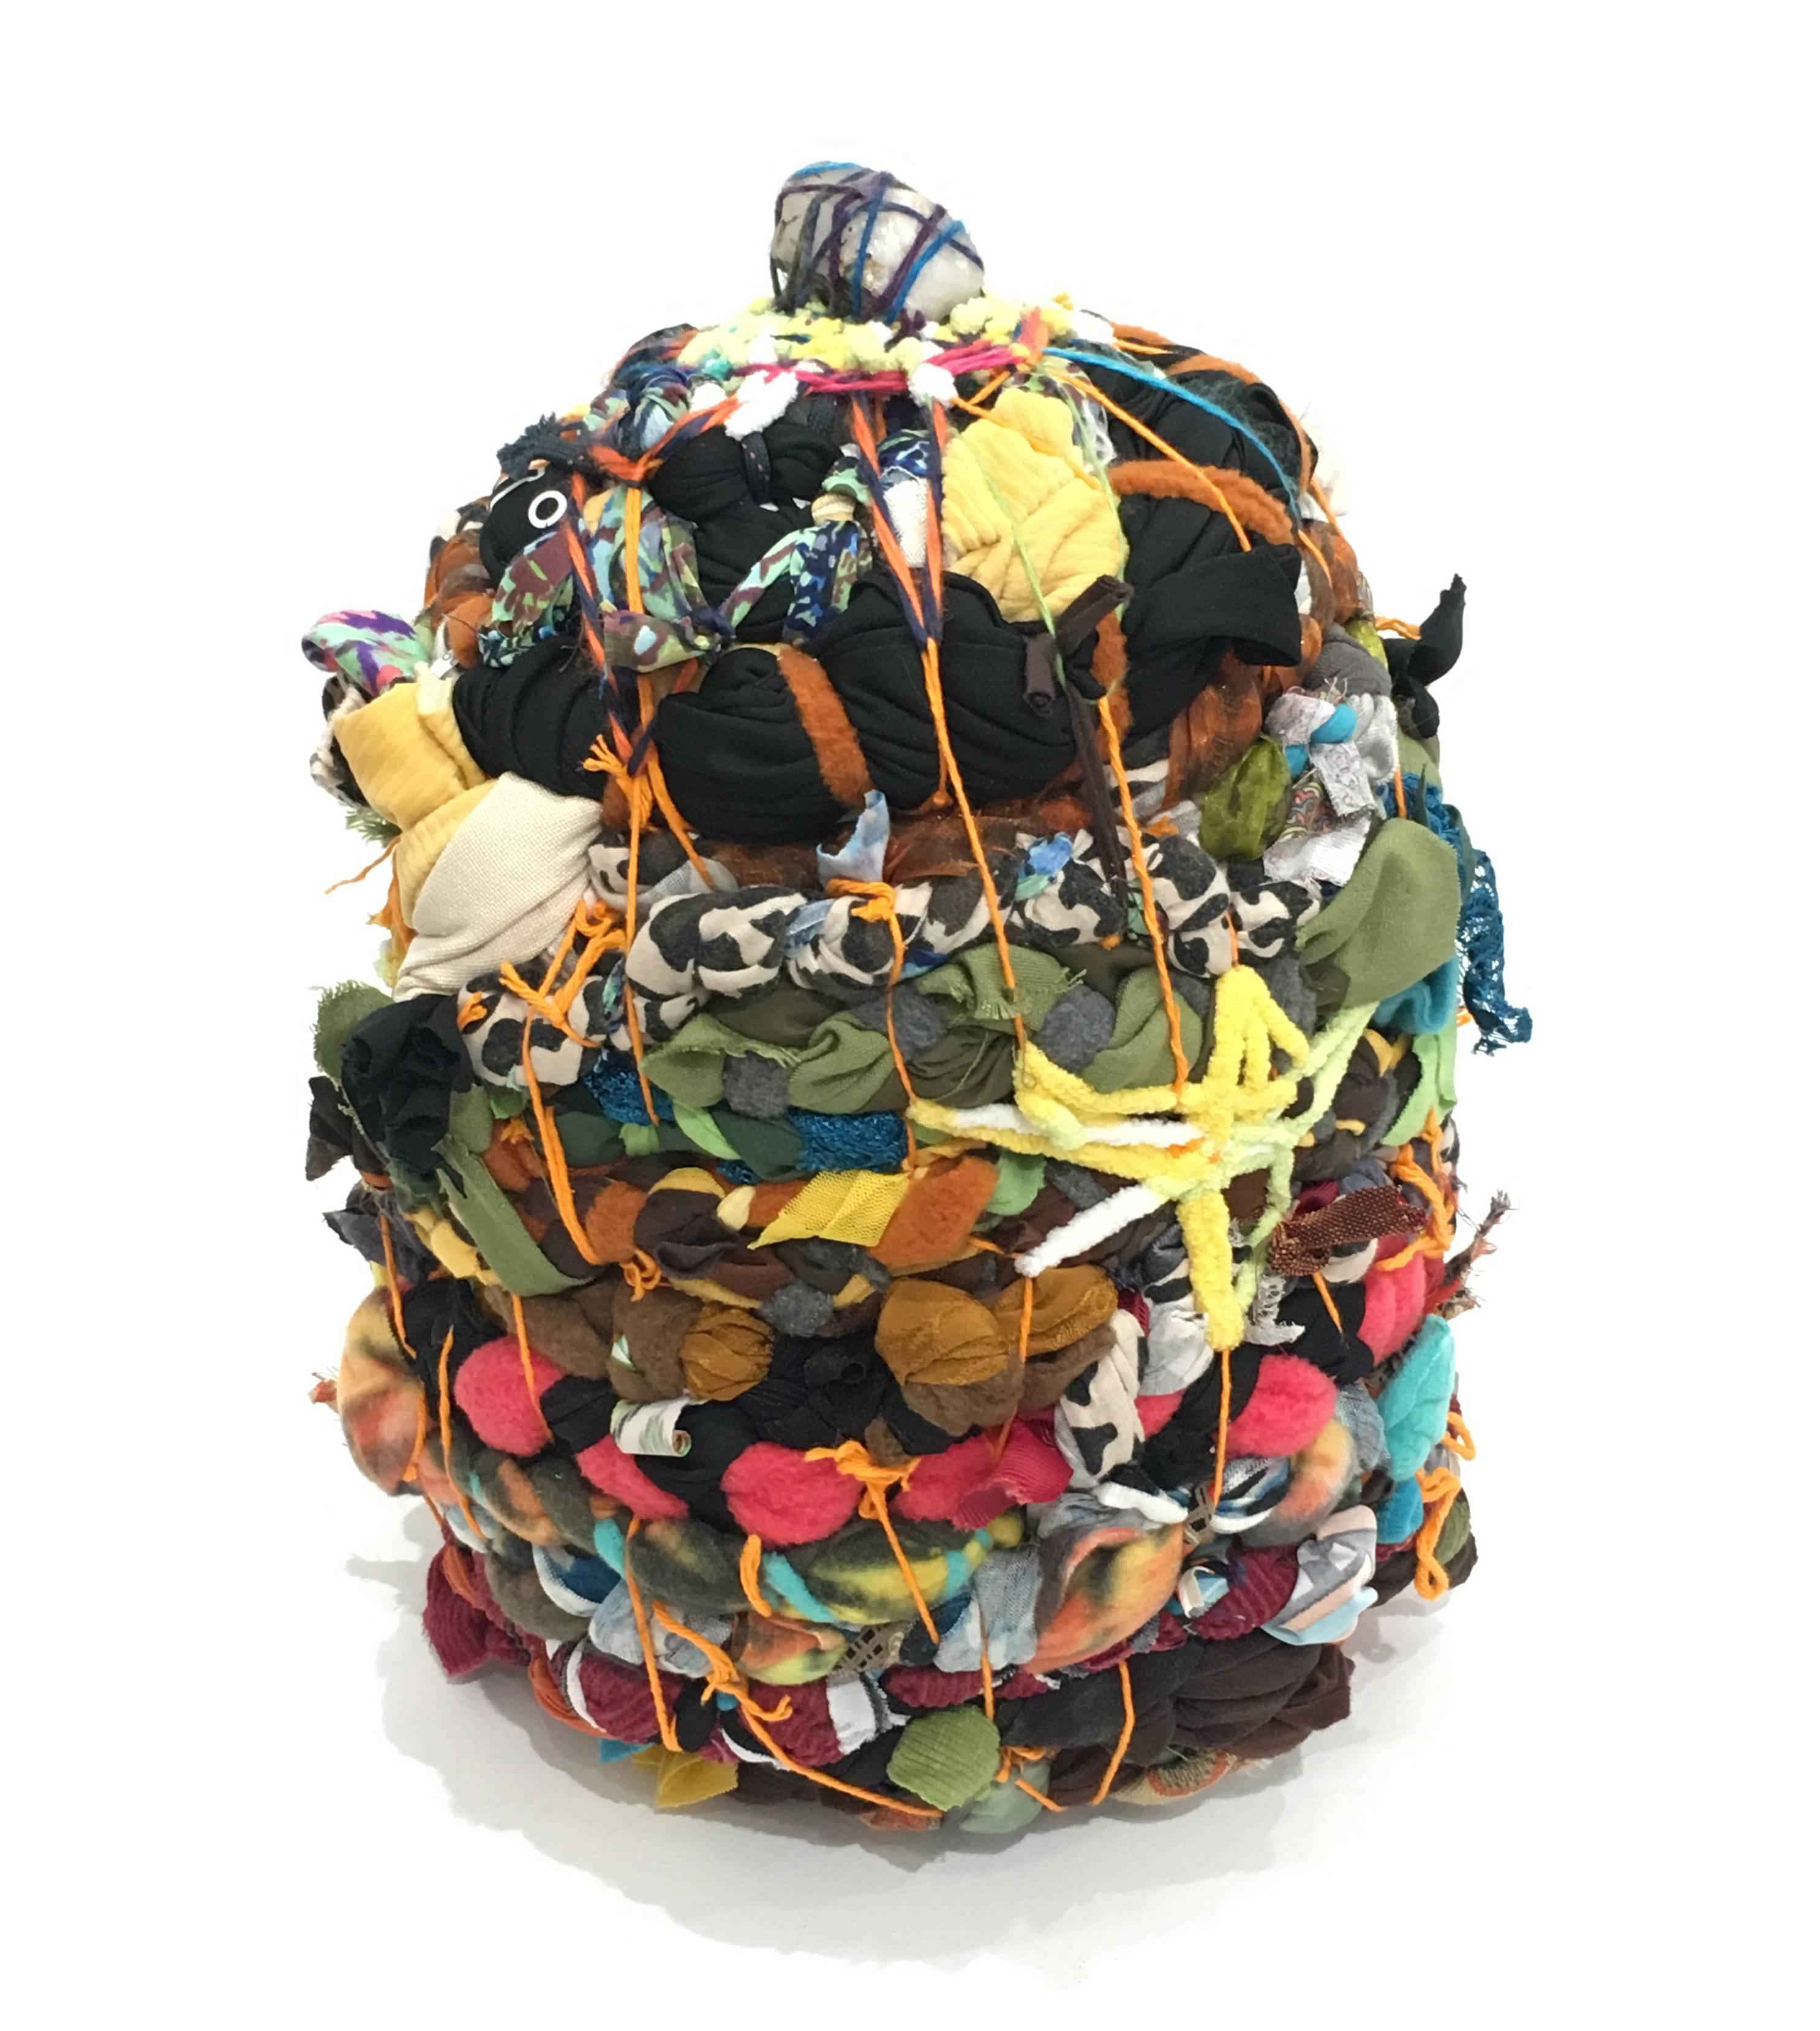 Ethan Meyer Abstract Sculpture - Contemporary Abstract Mixed Media Sculpture with Fabric, Thread, and Quartz 